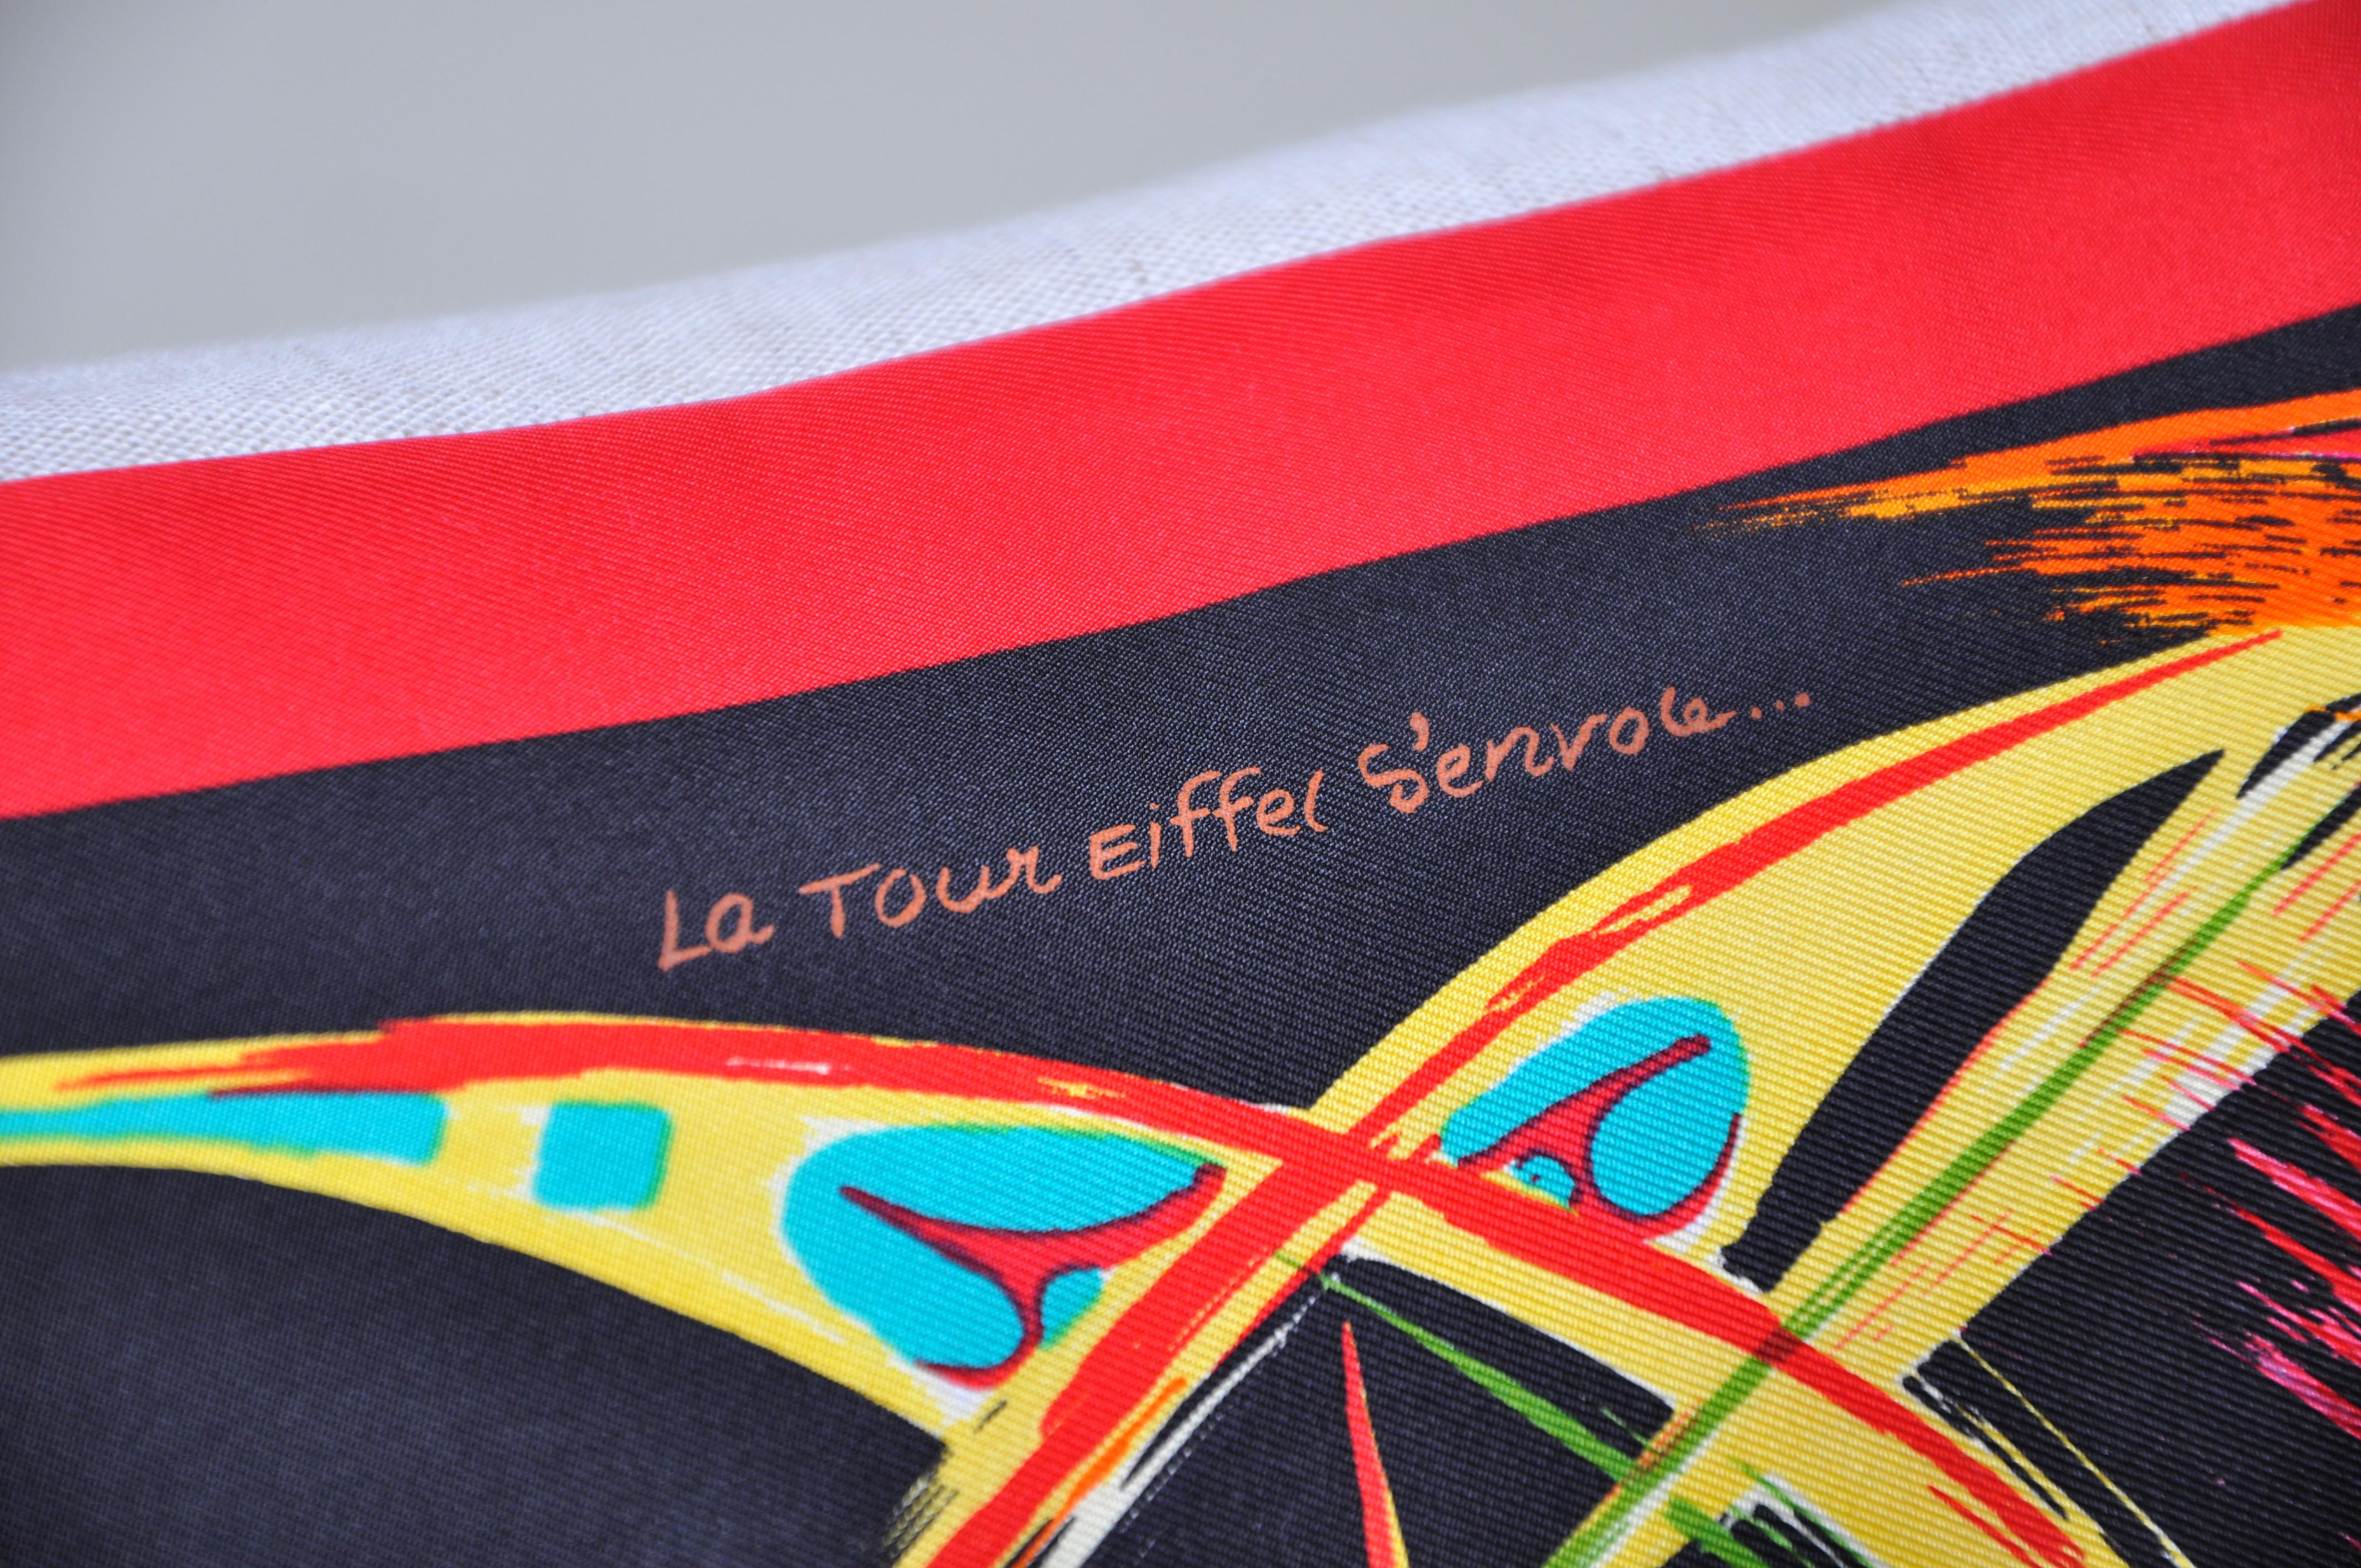 Rare vintage Hermès Eiffel Tower Paris silk scarf and Irish linen cushion pillow black red blue

The ‘crème de la crème’ of scarves, this beauty is a one-of-a-kind custom made luxury cushion (pillow) from an exquisite and rare vintage silk themed